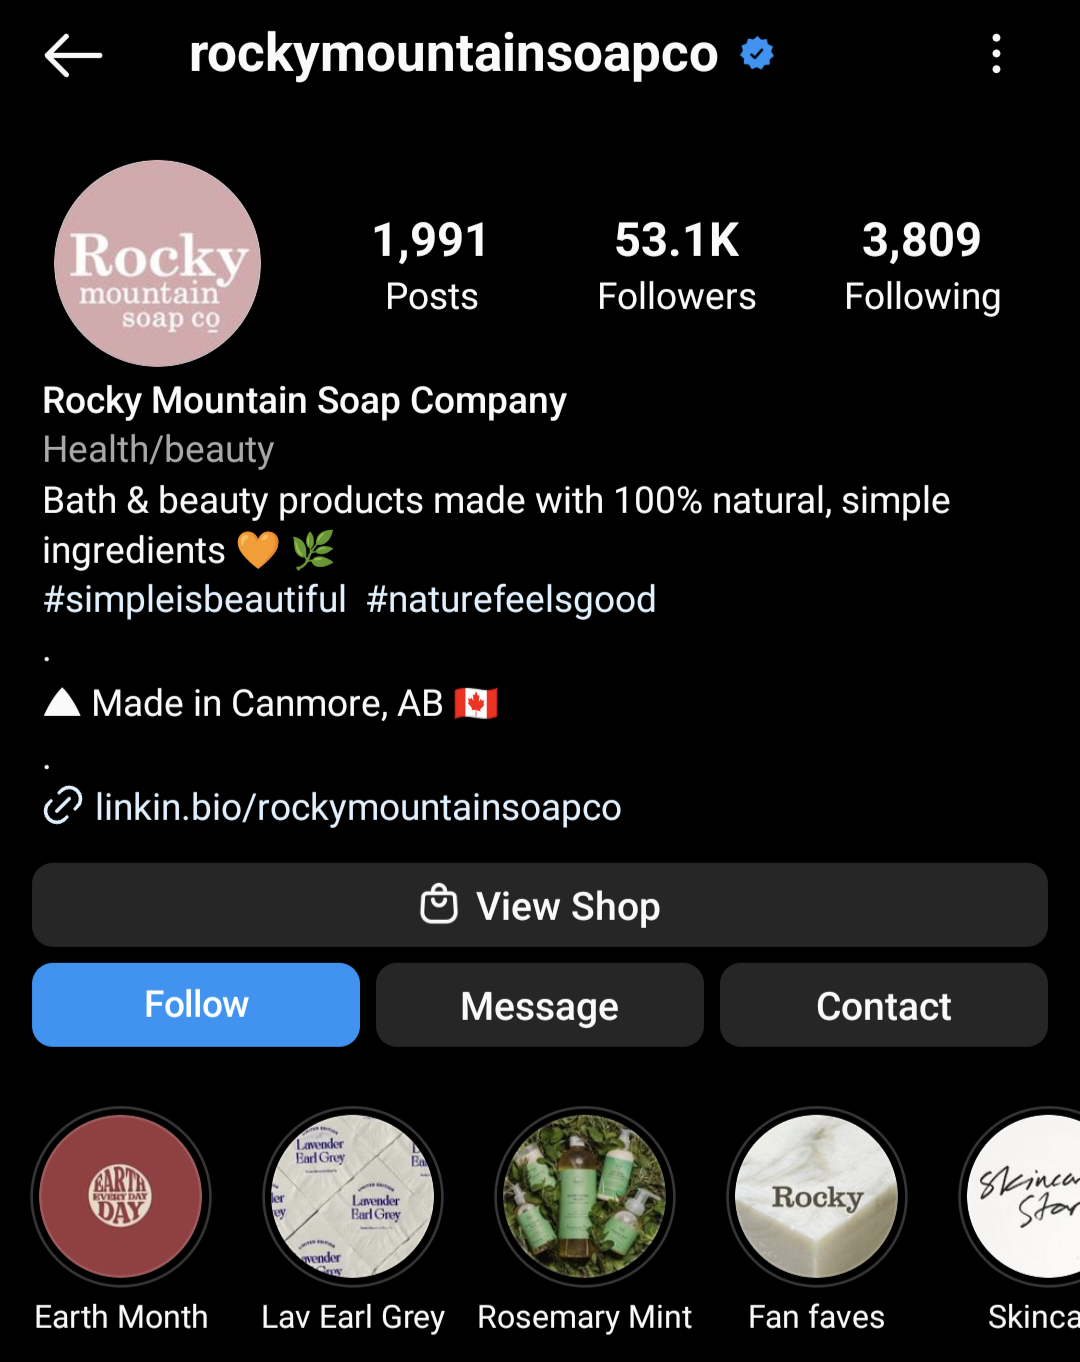 Rocky Mountain Soap Co. uses emojis in its Instagram bio to reflect its natural products